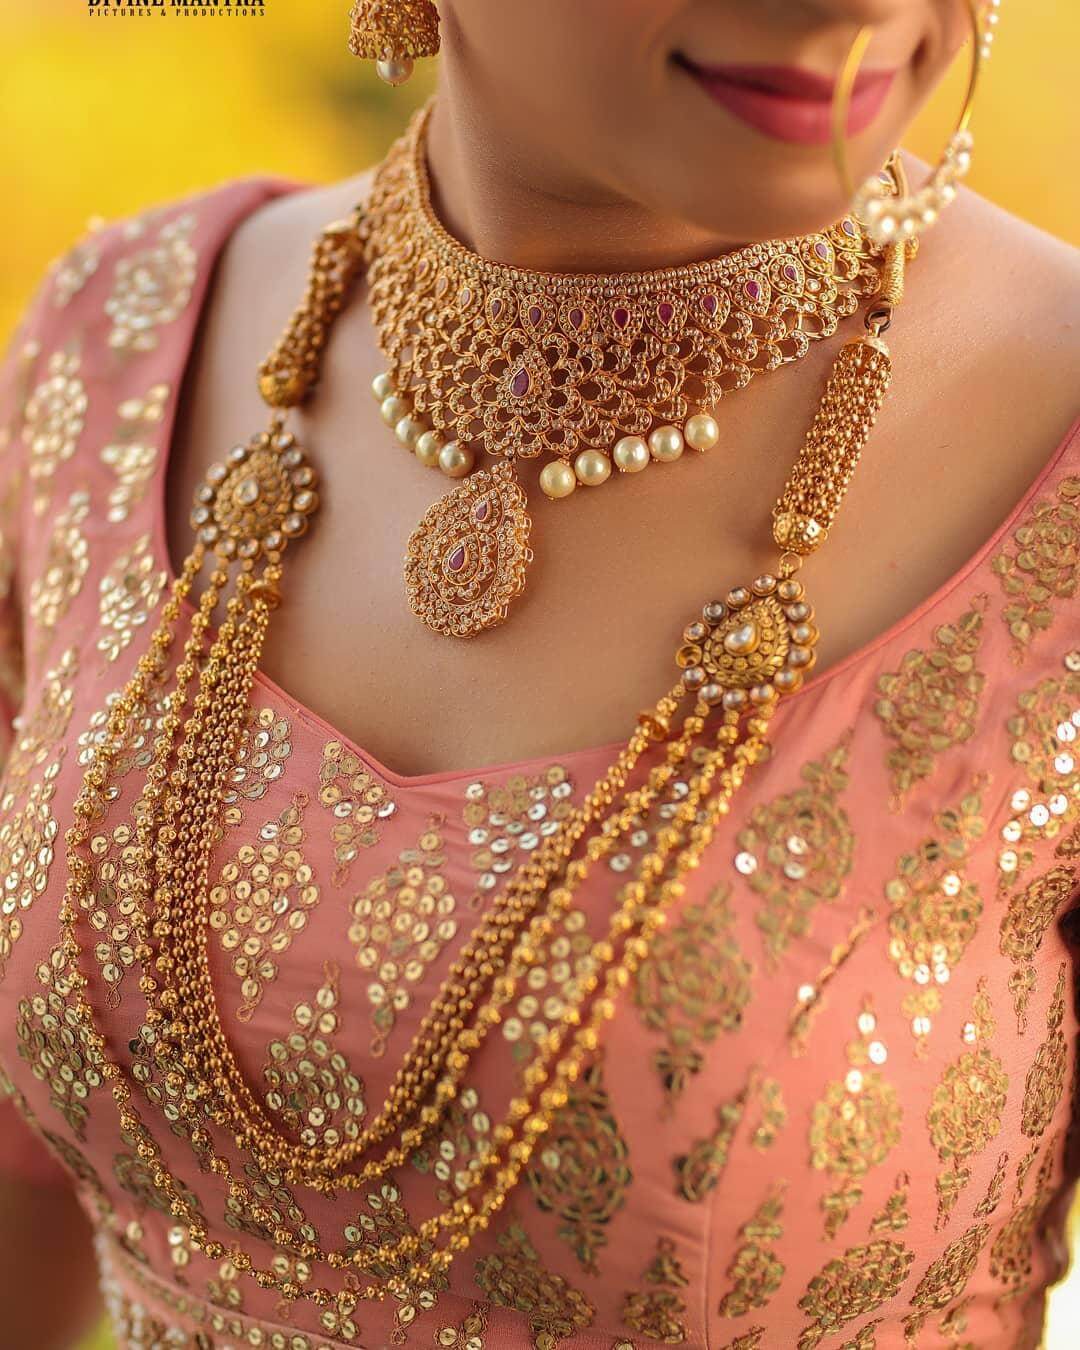 Stunning Bridal Gold Necklace Designs For The Swoon-Worthy Brides ...